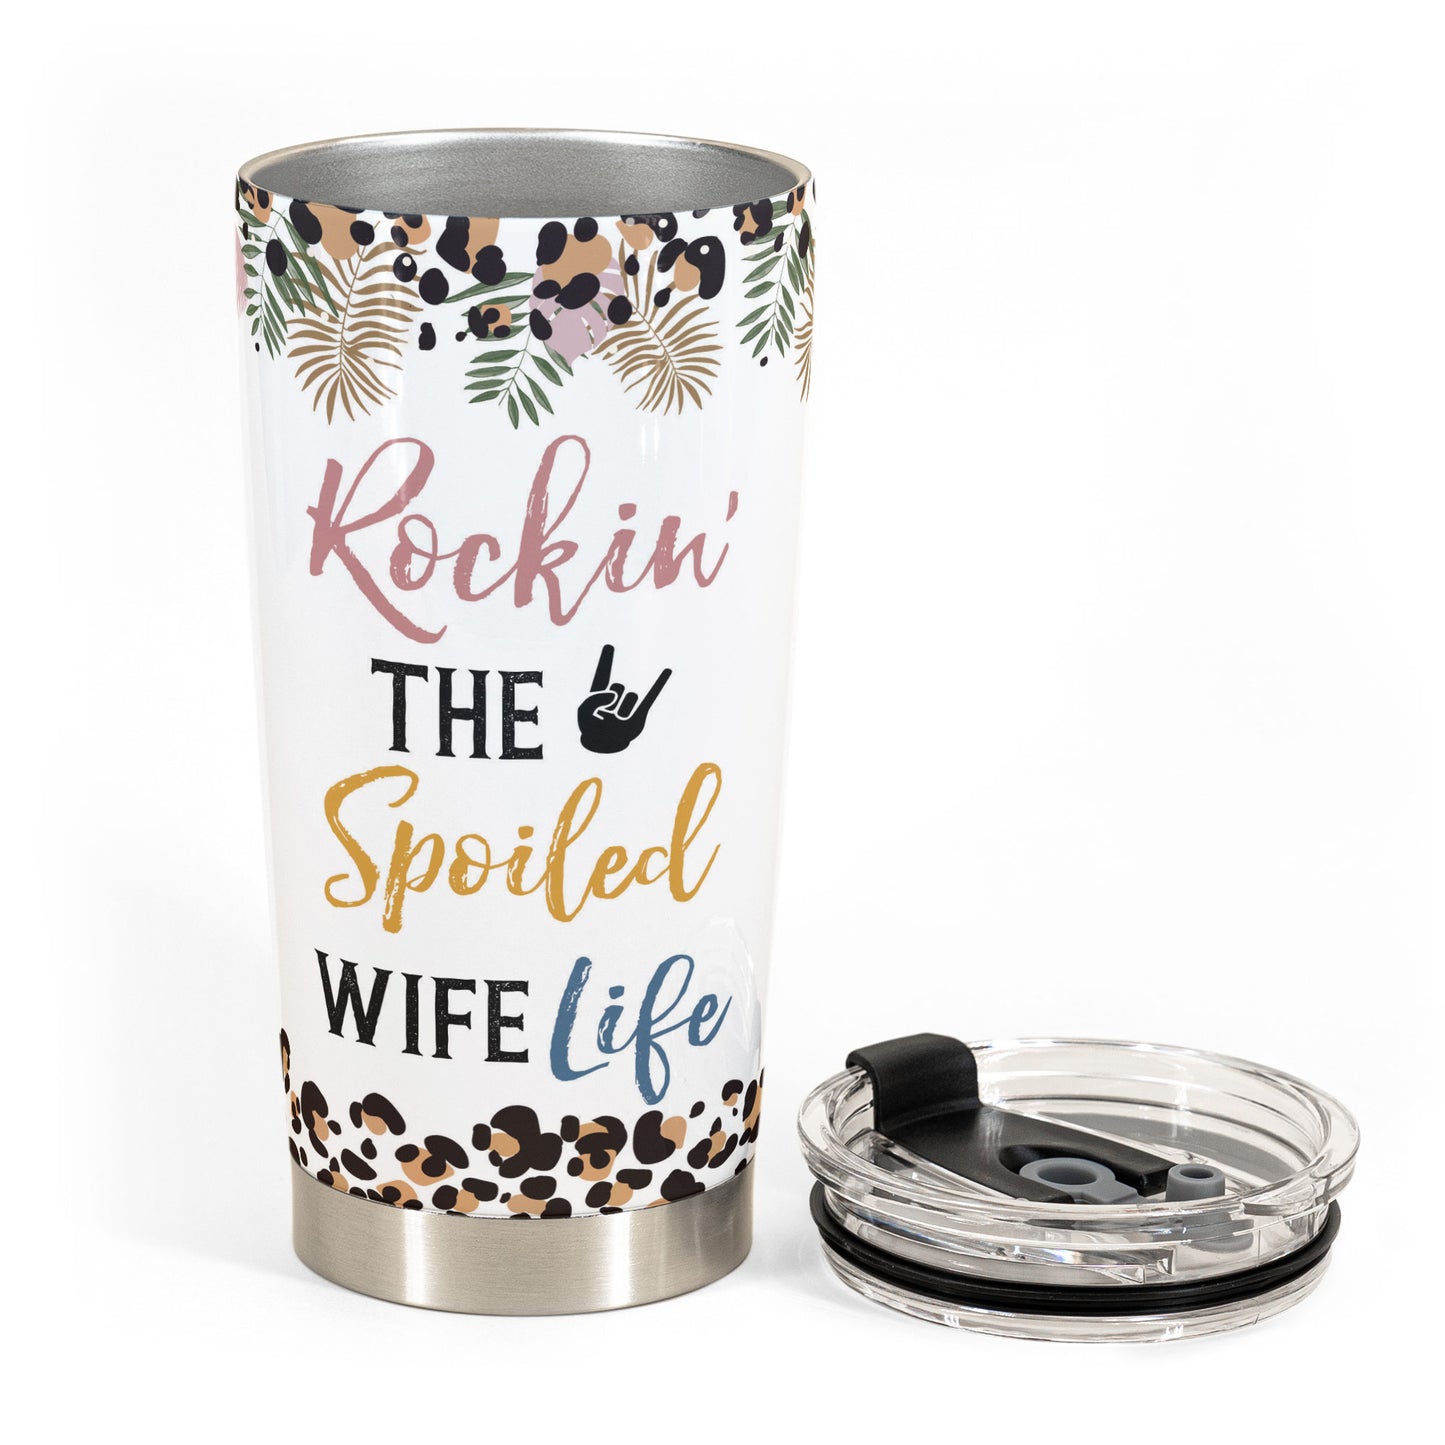 Rockin' The Spoiled Wife Life - Personalized Tumbler Cup - Anniversary, Wedding Gift For Wife, Lover, Spouse